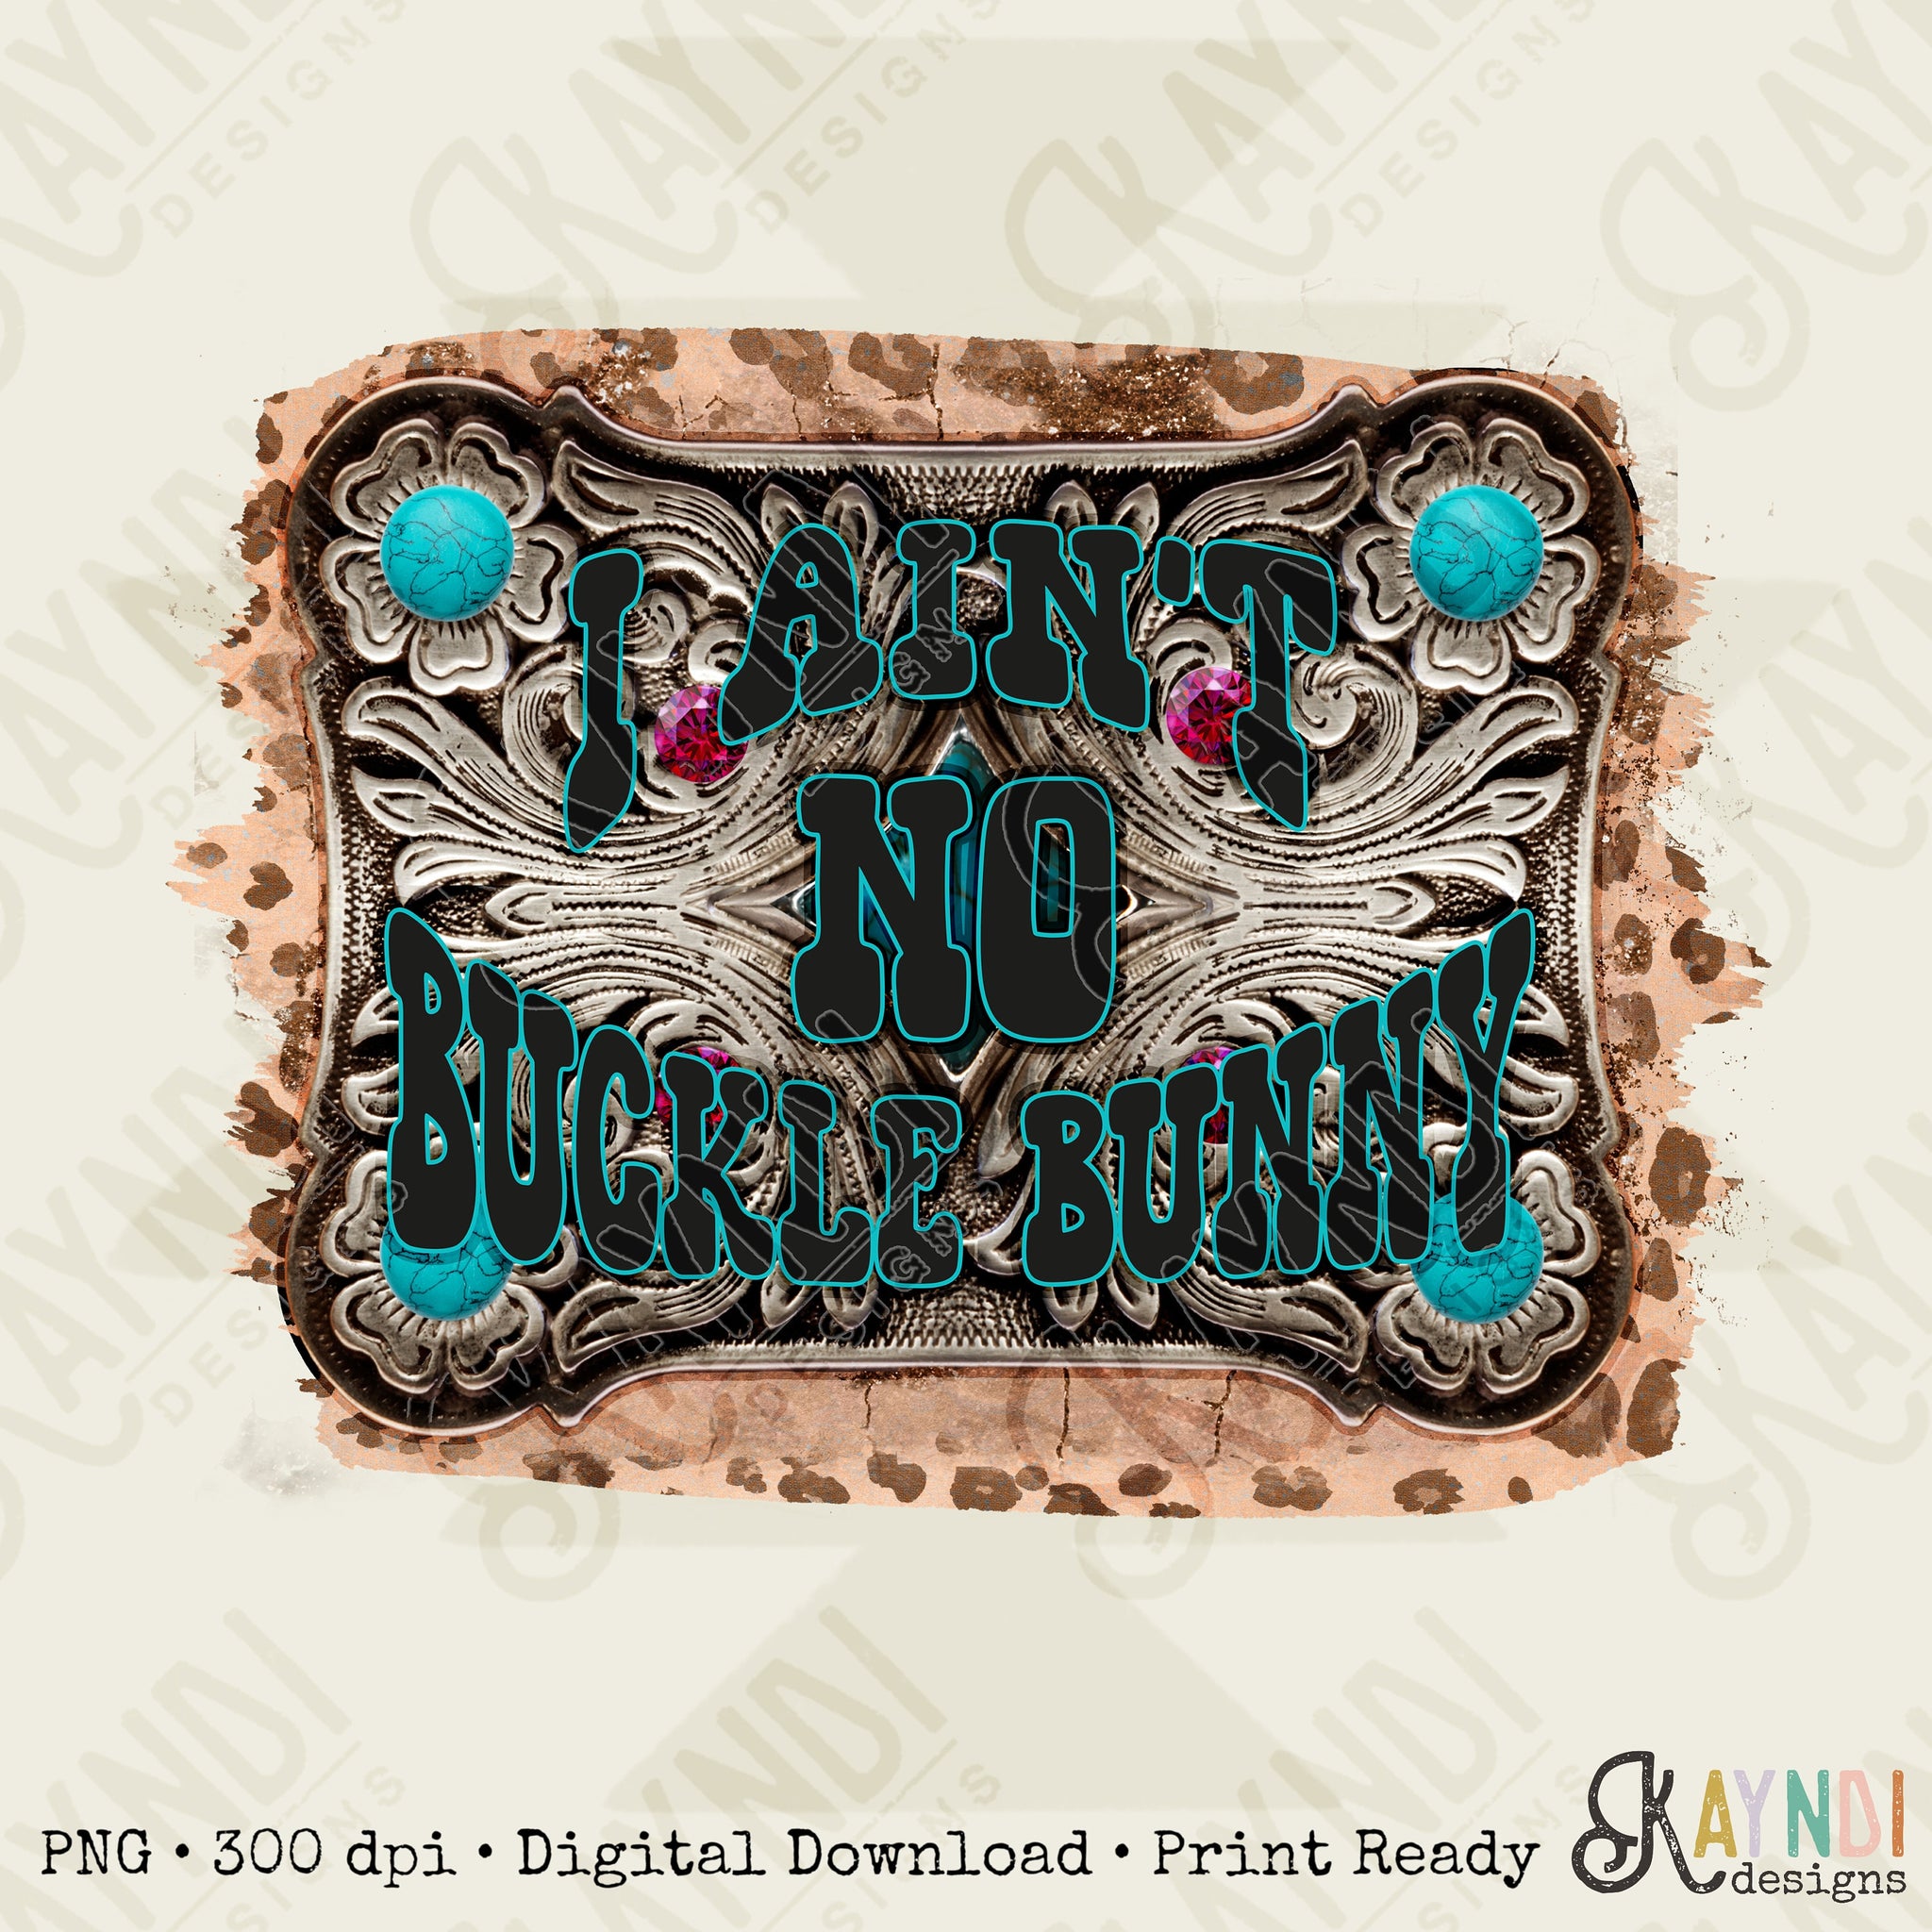 I ain't No Buckle Bunny Sublimation Design PNG Digital Download Printable Western Cowgirl Belt Buckle Concho Turquoise Rodeo Leopard